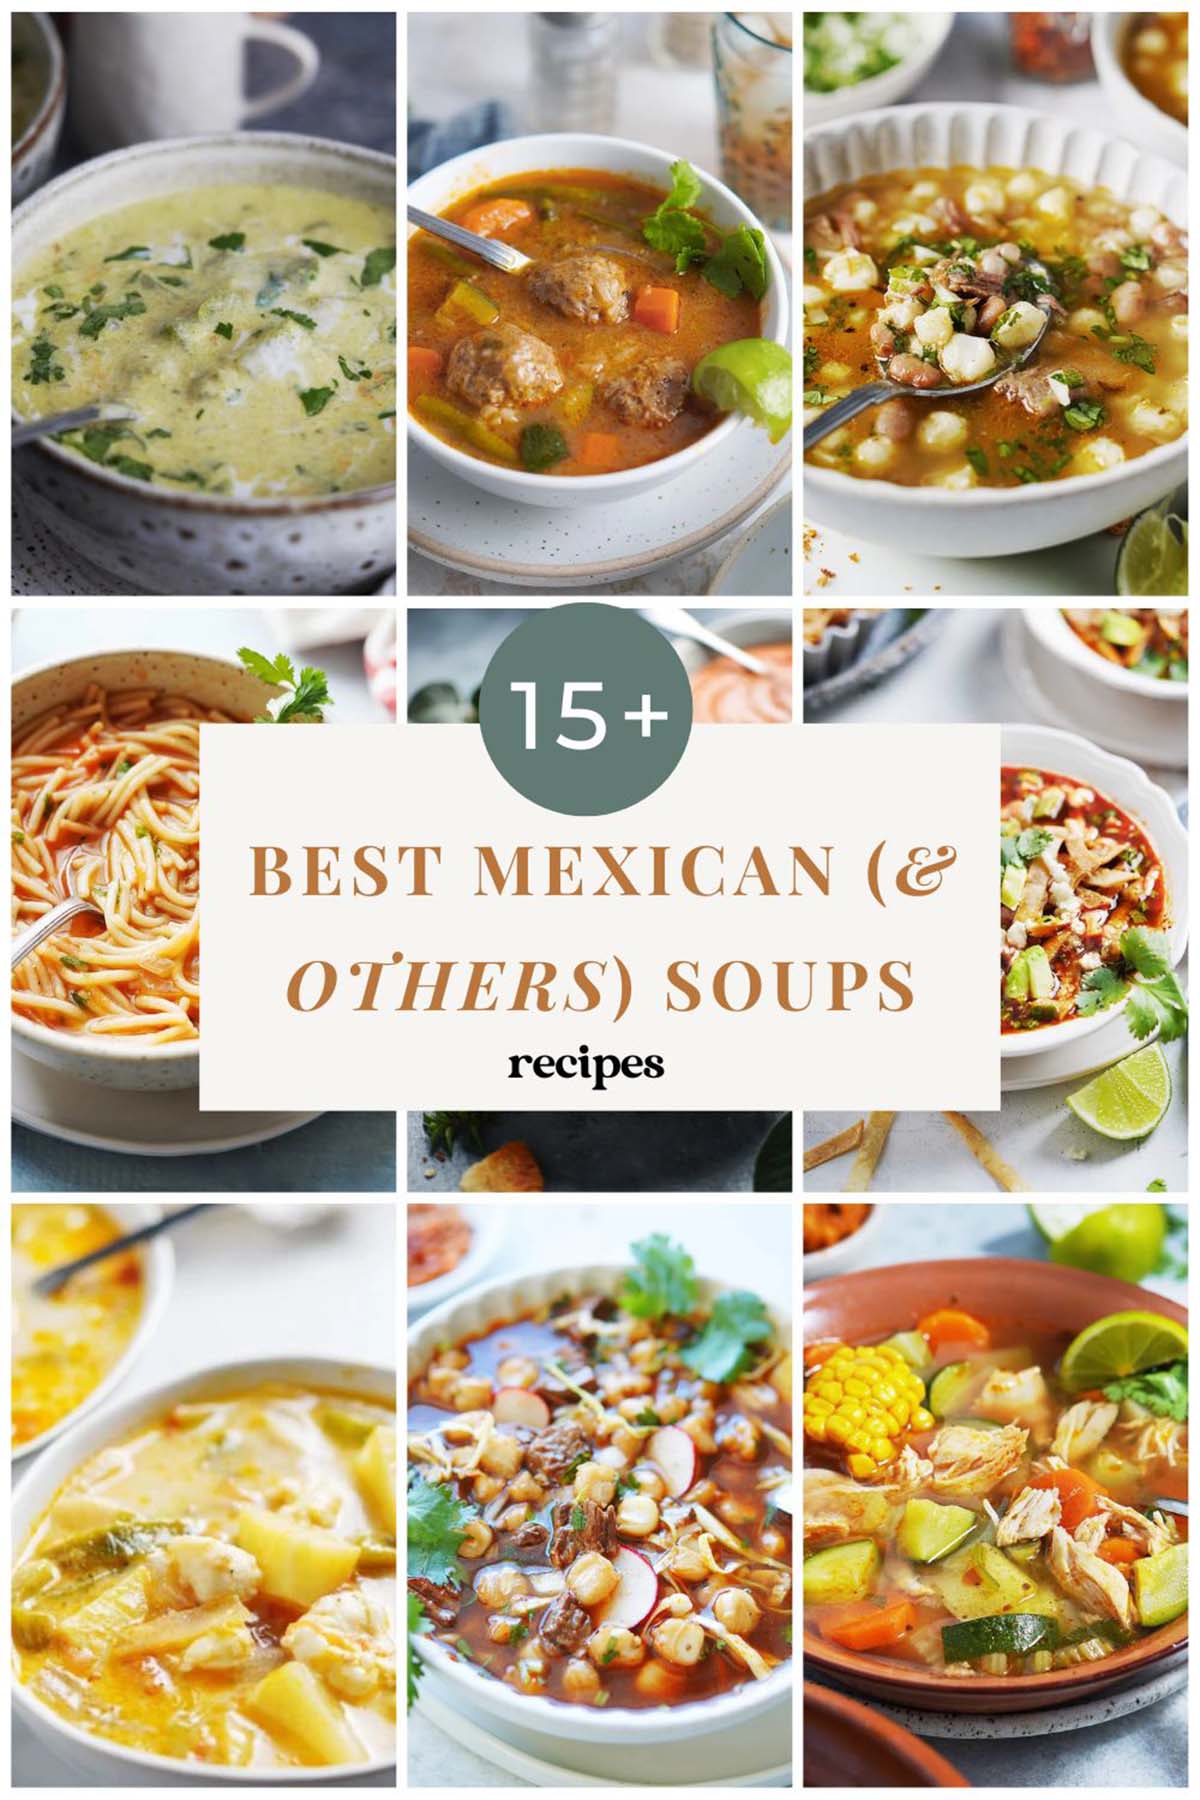 15+ Best Mexican Soups